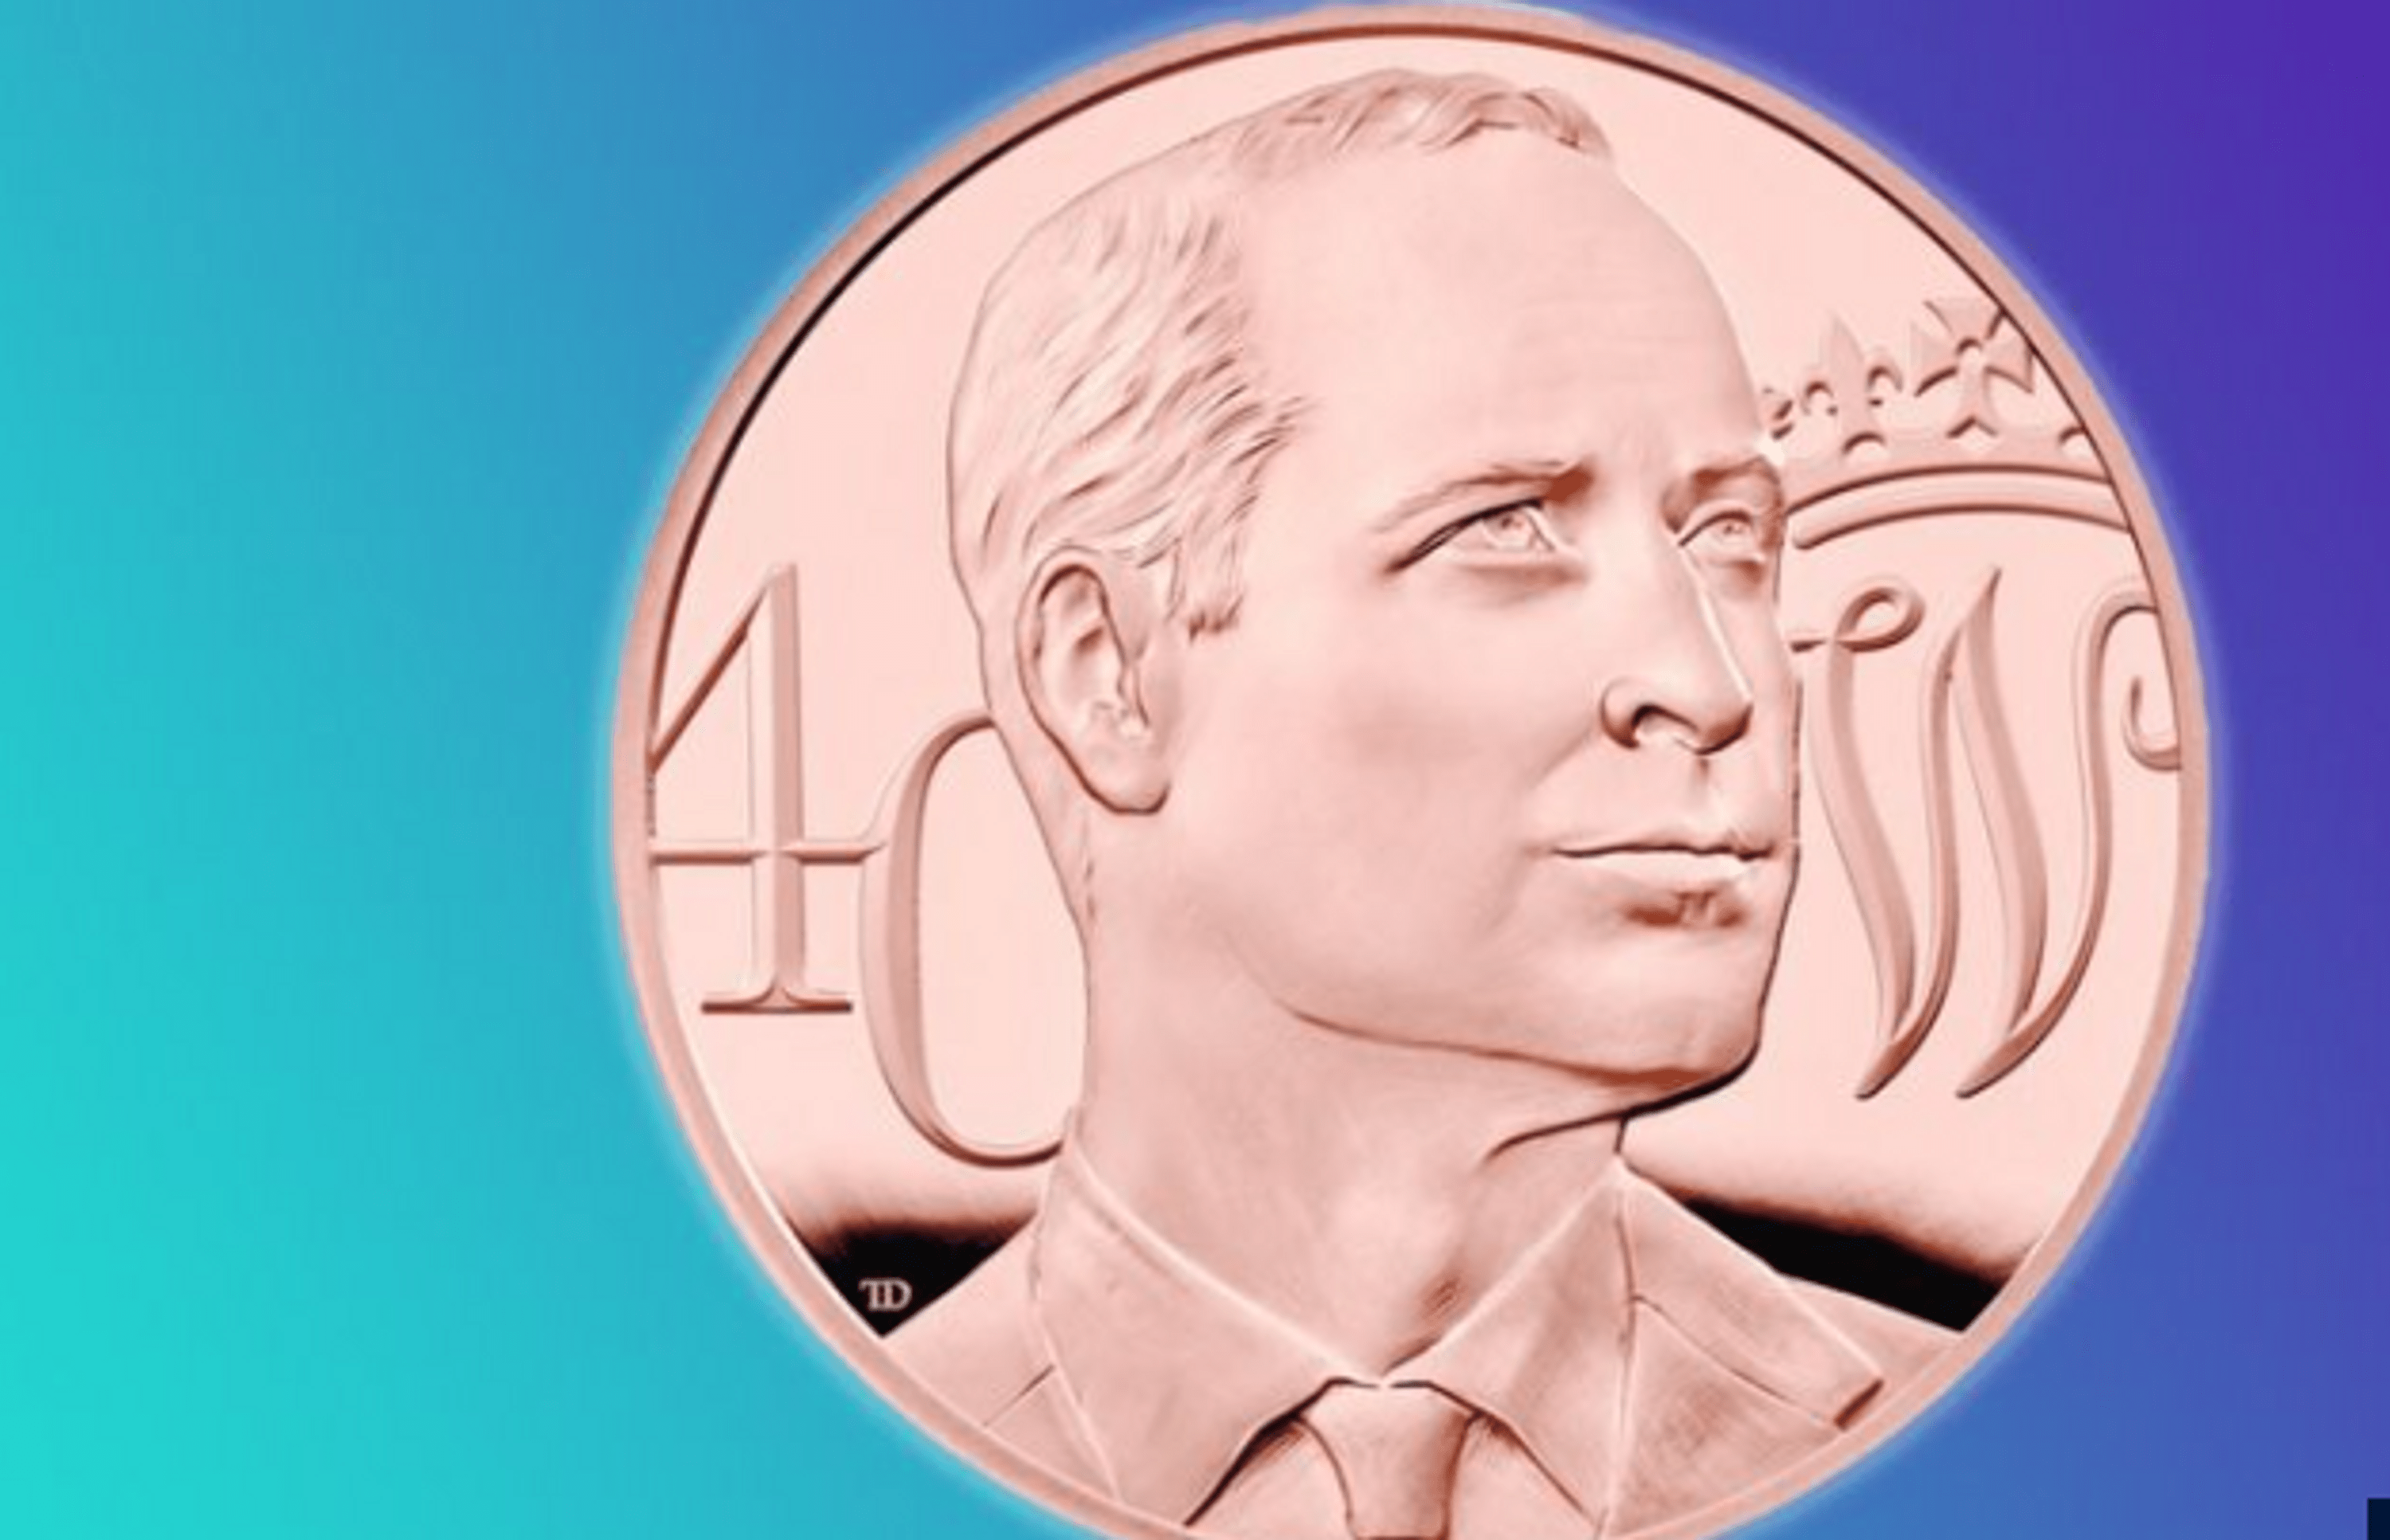 commemorative-coin-to-be-issued-to-celebrate-prince-williams-40th-birthday